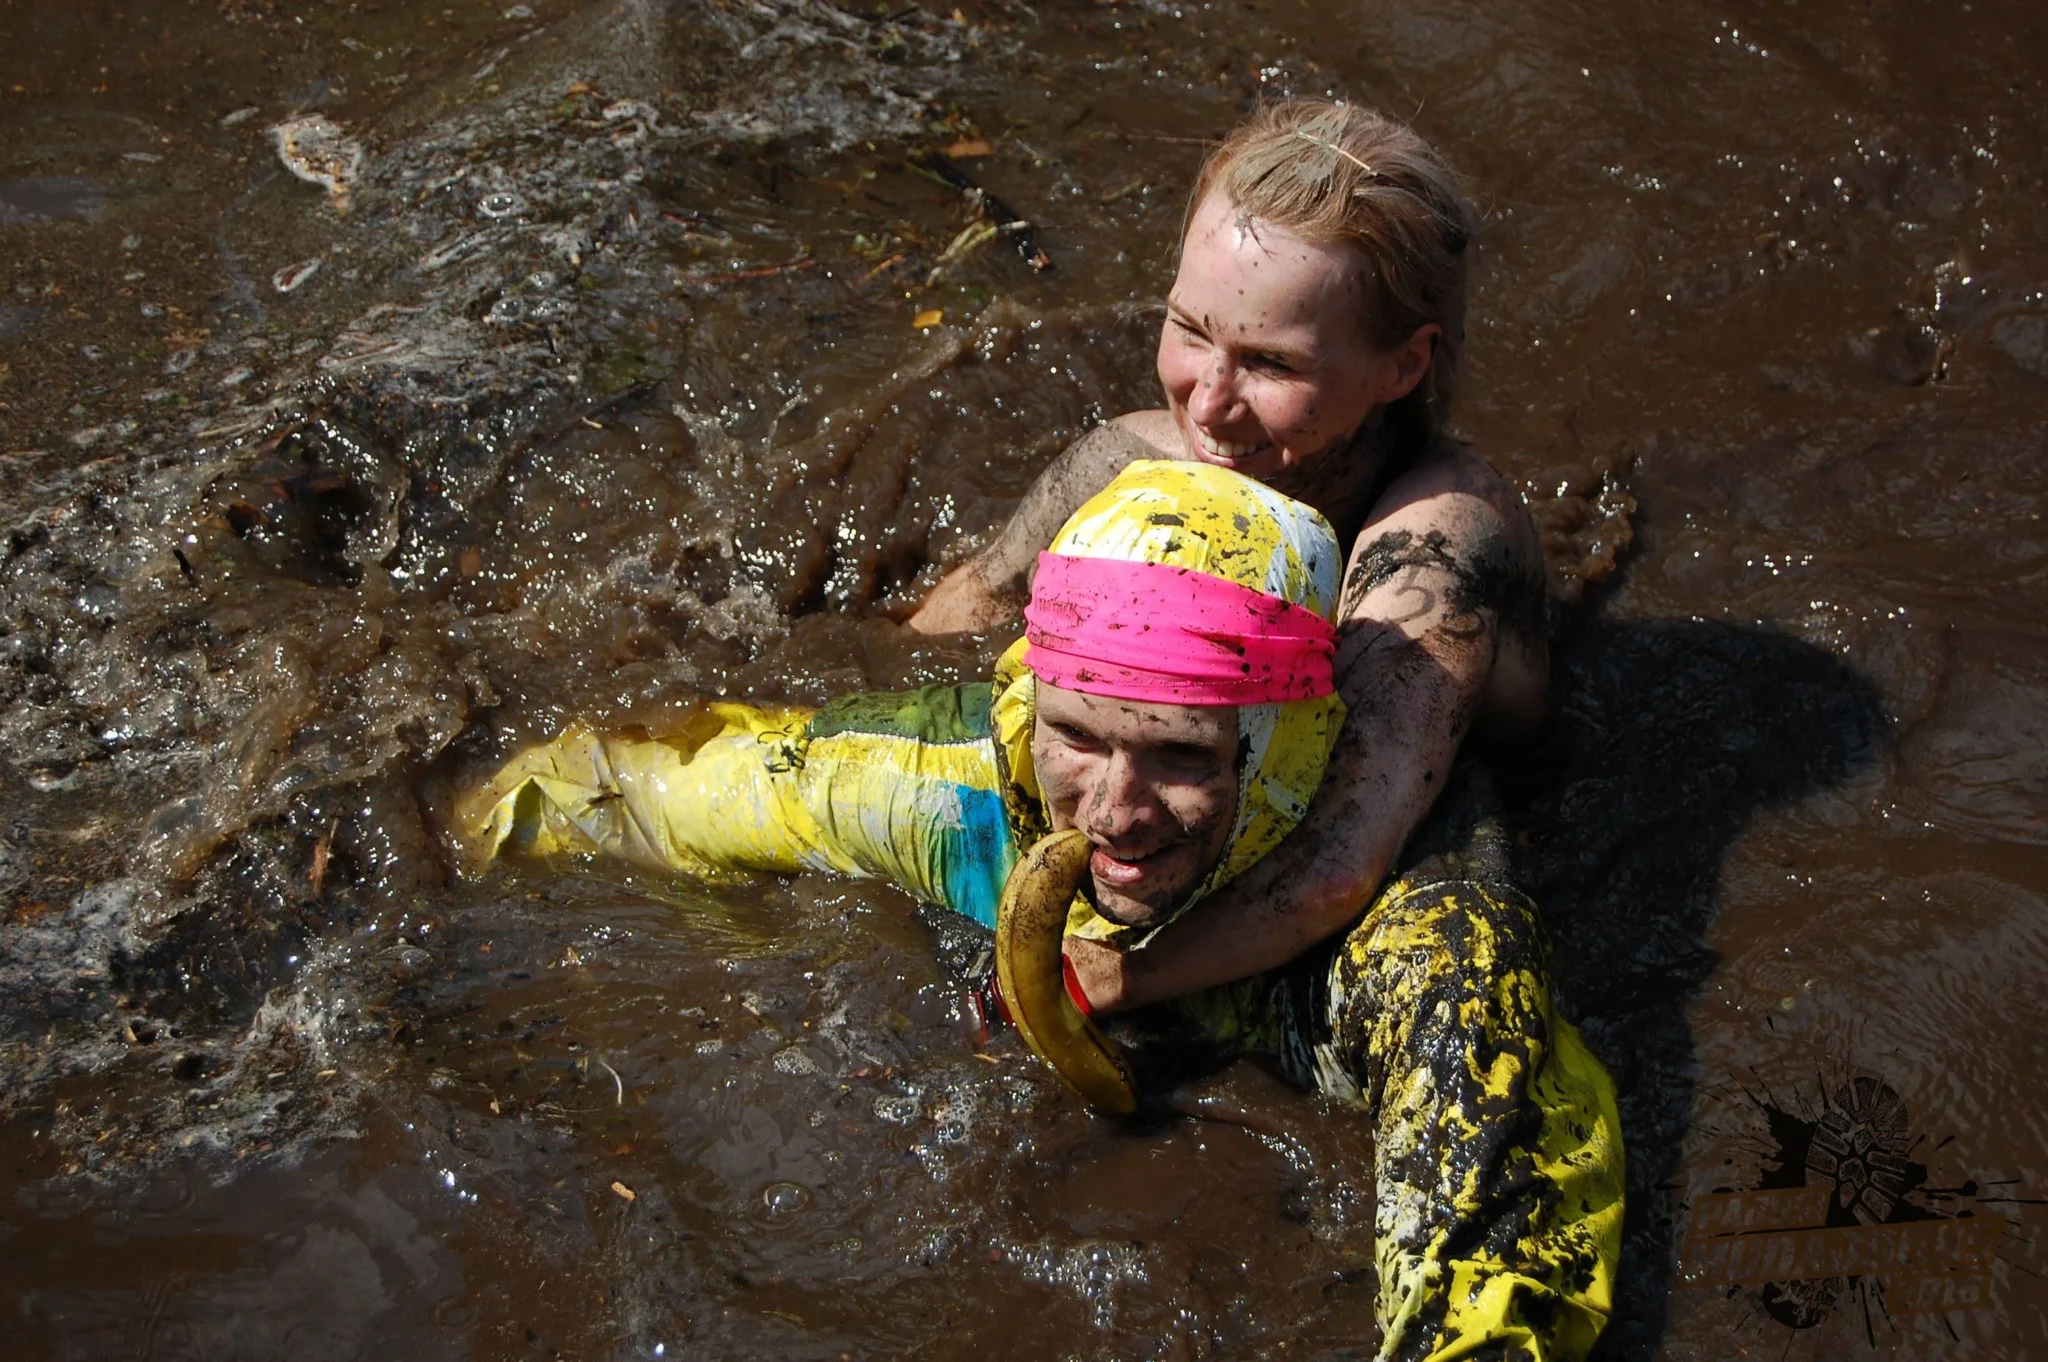 Runners Supporting Each Other at Pajusi Mud Run